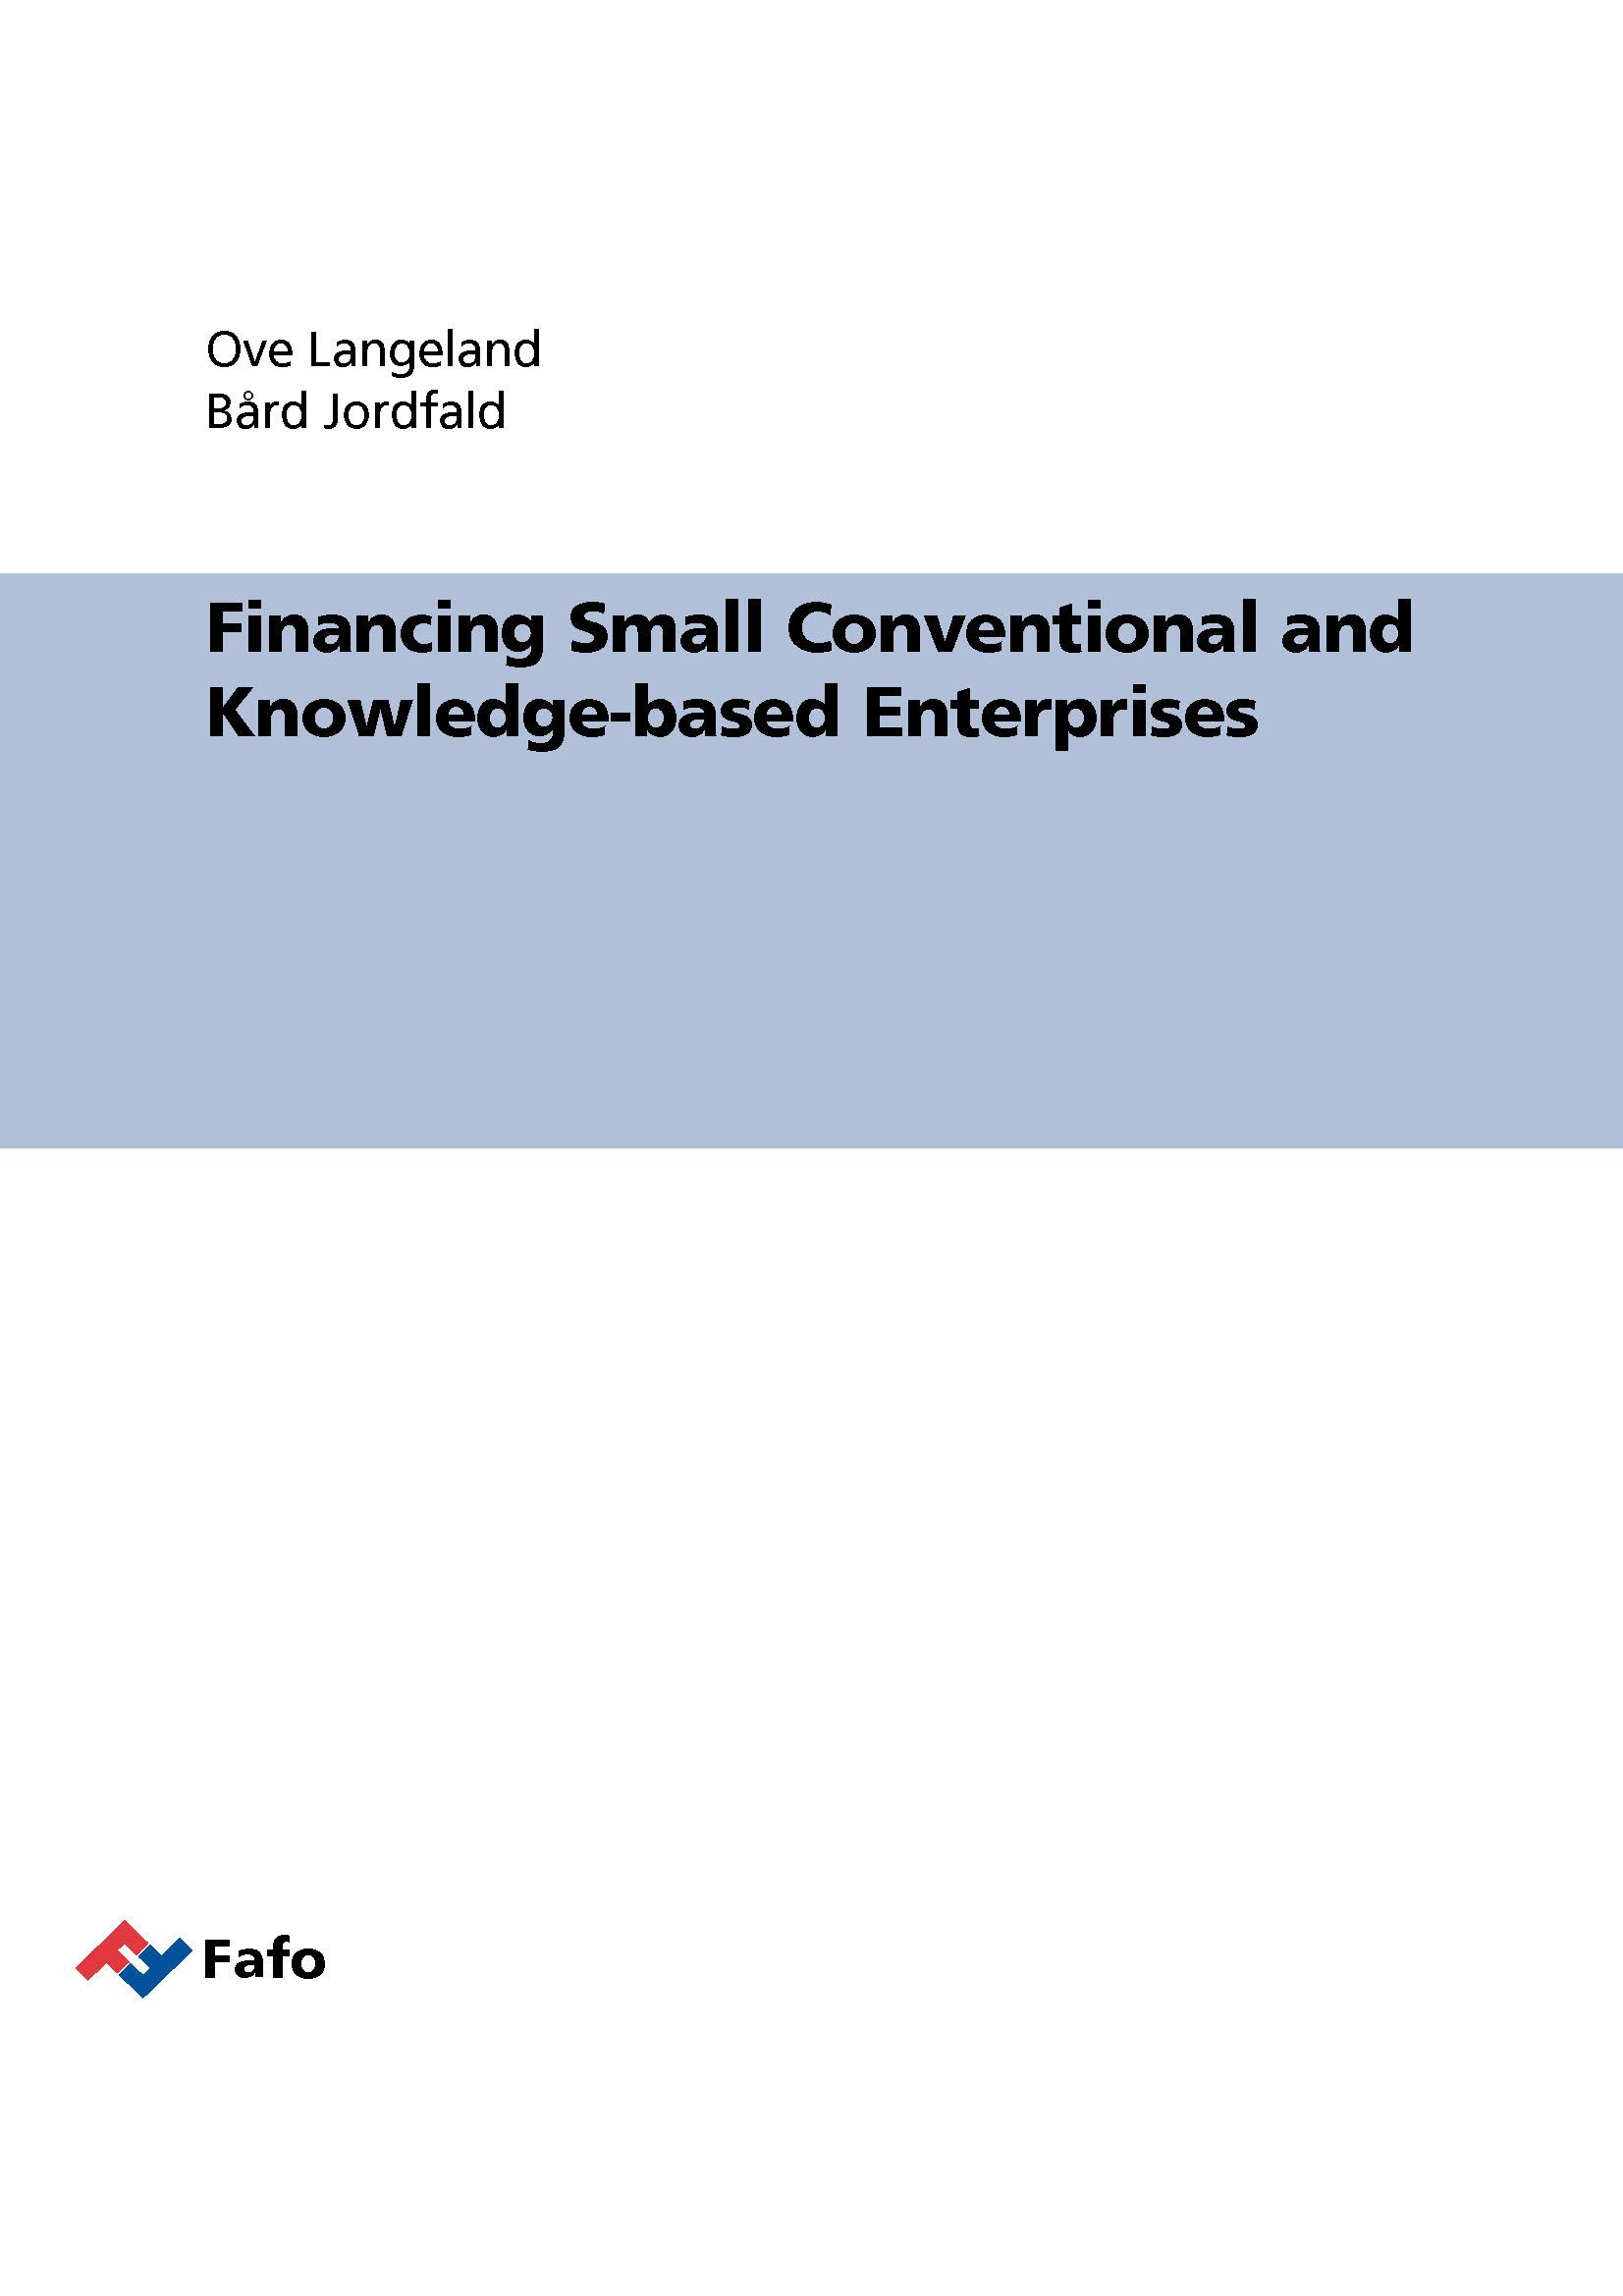 Financing Small Conventional and Knowledge-based Enterprises